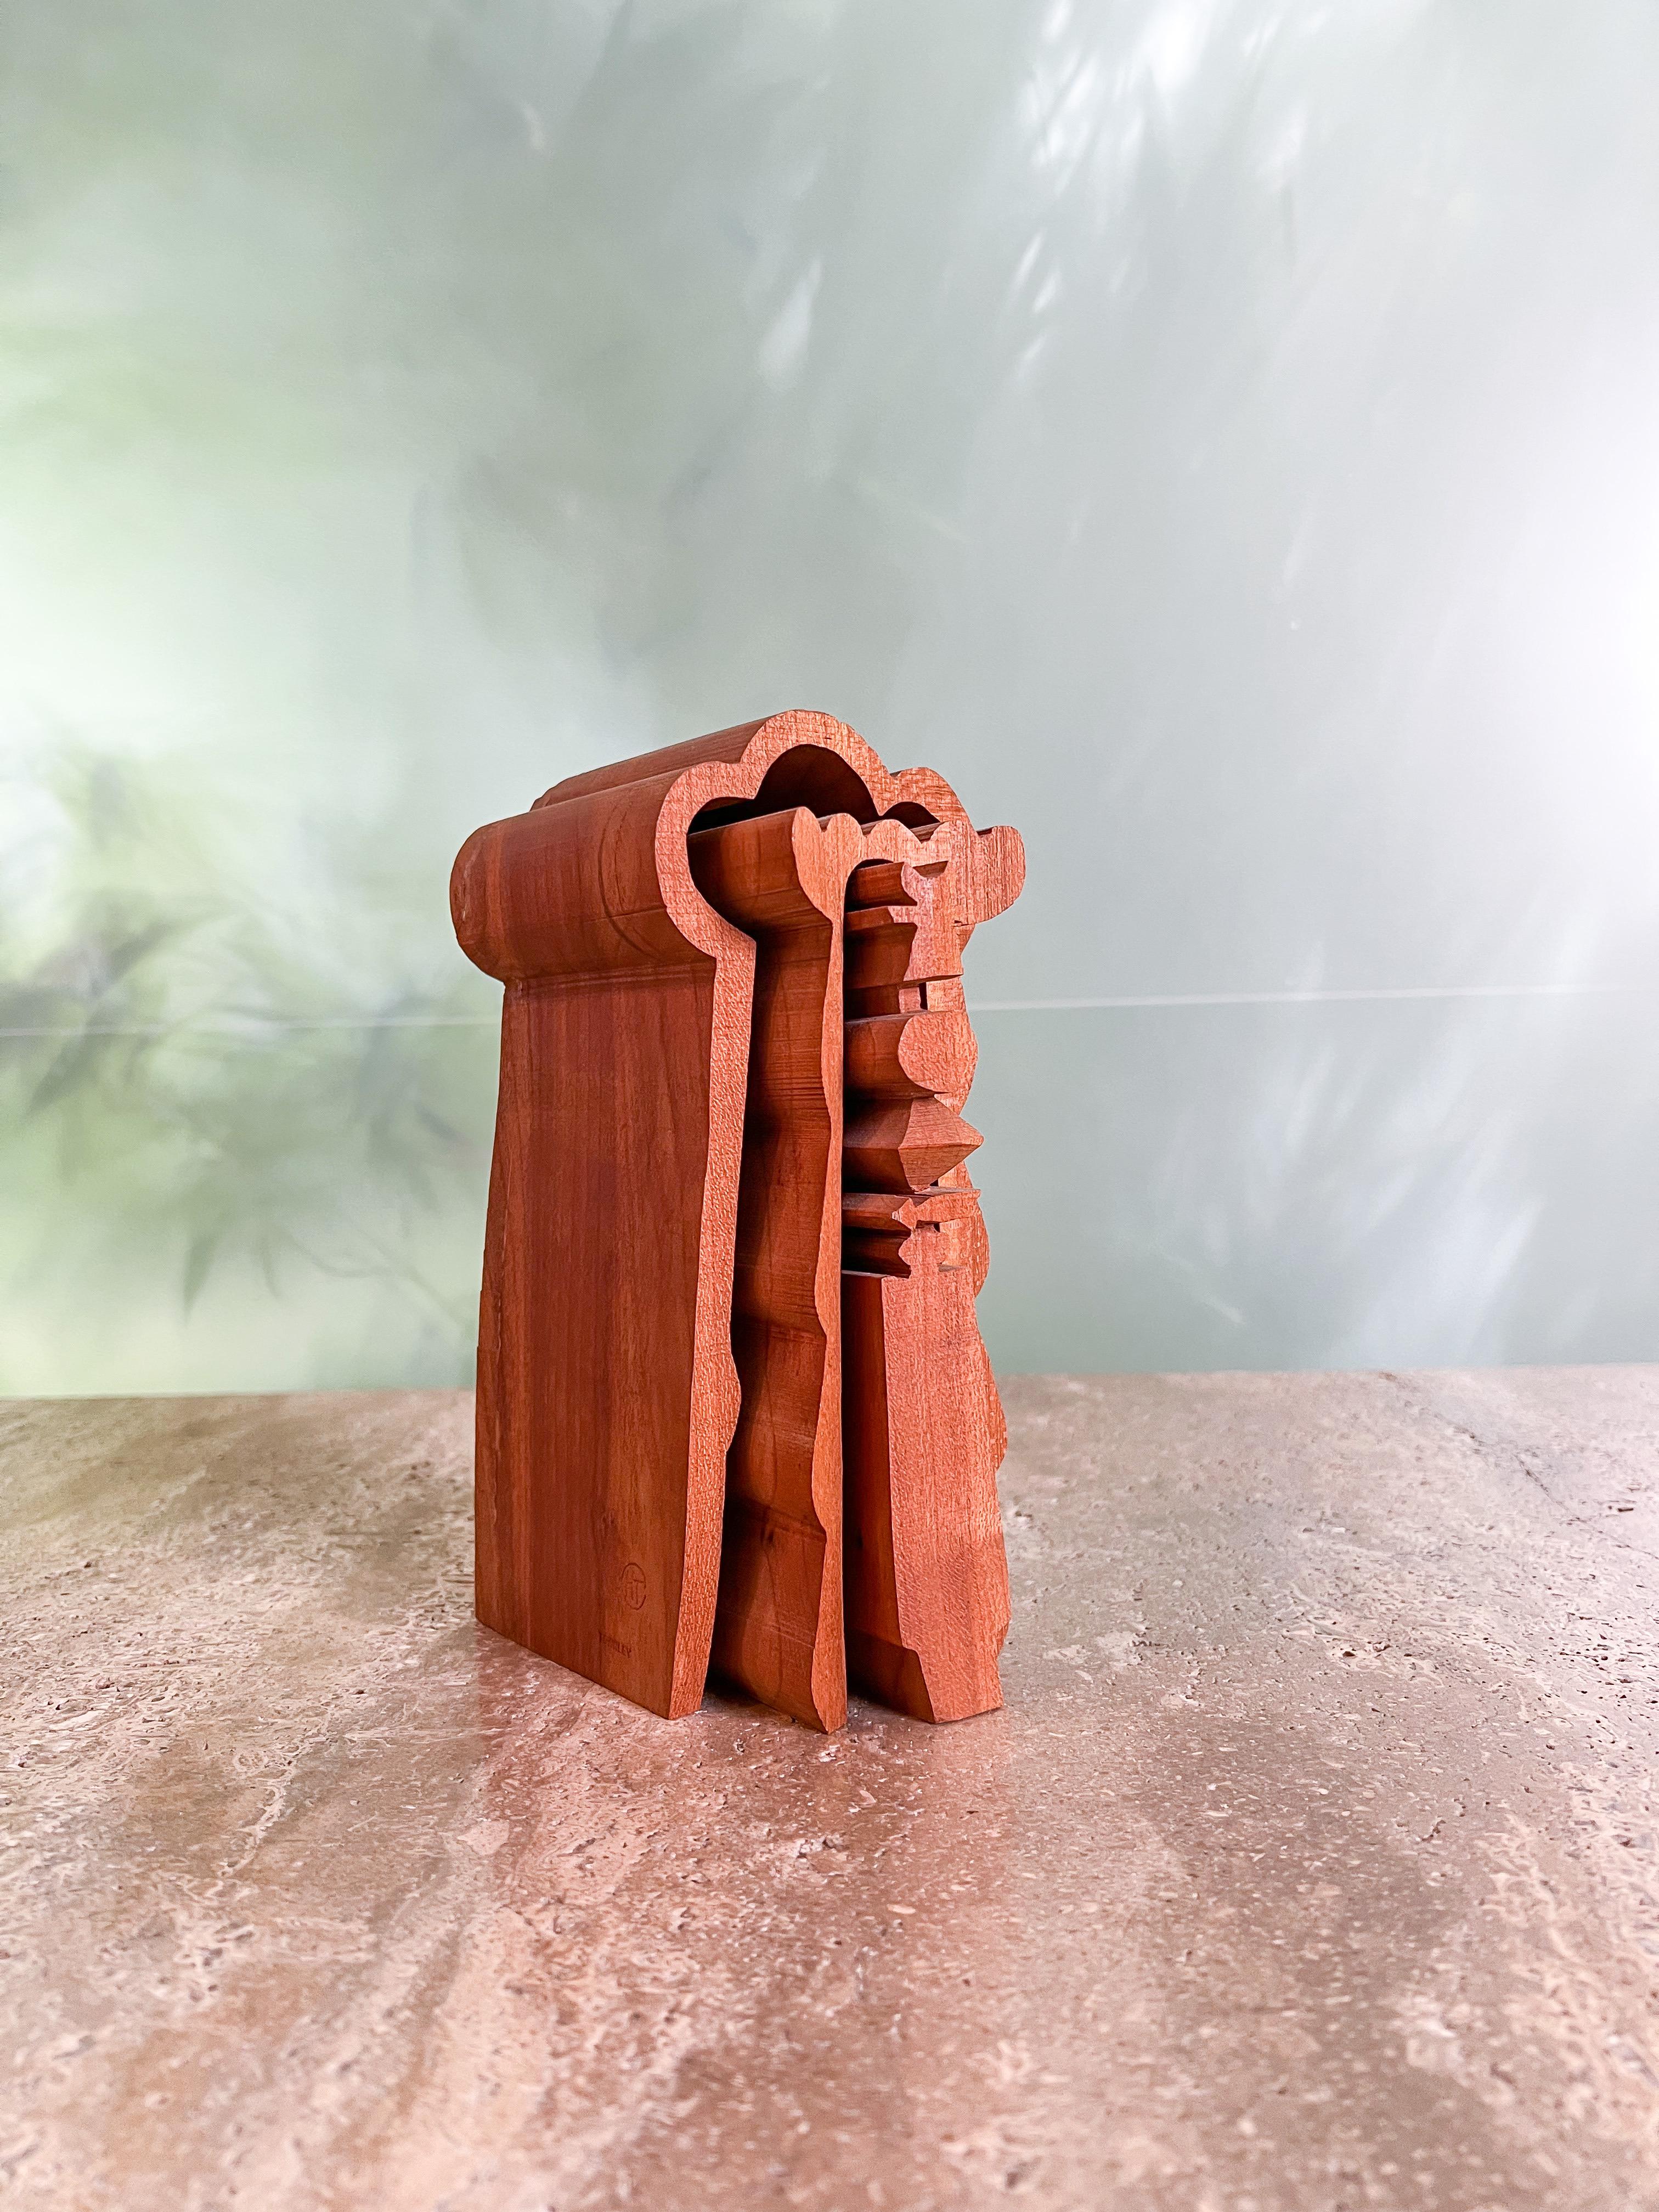 'Untitled Spirit Place' is a nesting tabletop sculptor by American artist Hugh Townlely (1923-2008). Cut from red oak, this whimsical totem displays the artist's lifelong fascination with the abstracted form. Stamped 'TOWNLEY' along with the 'HT'